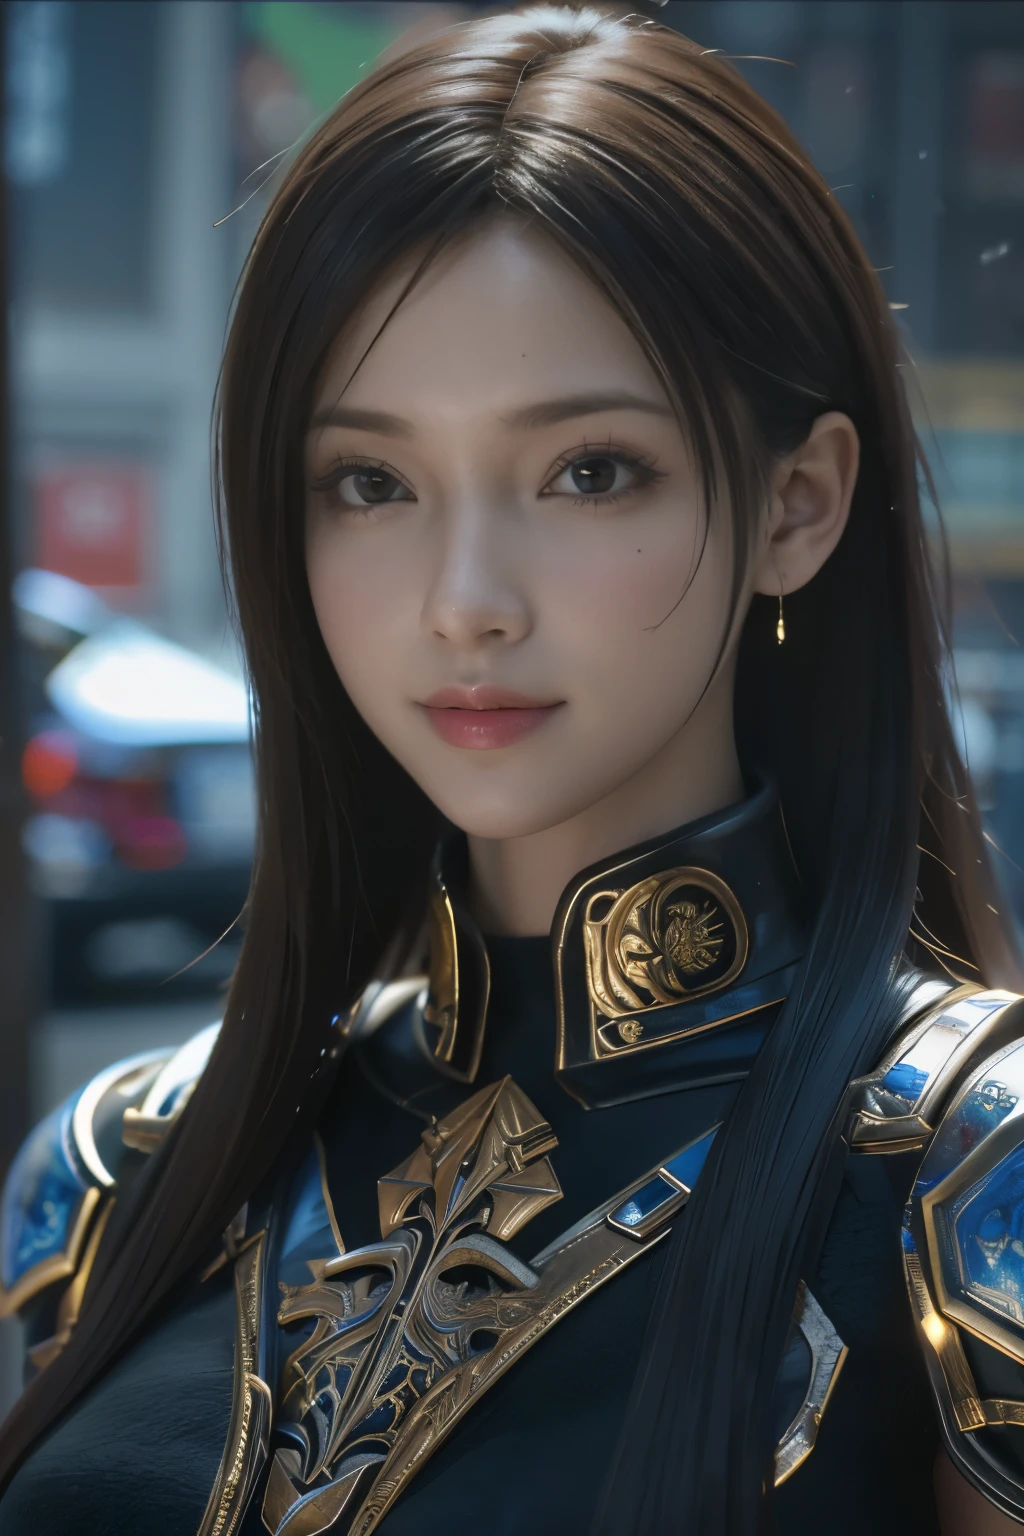 Game art，The best picture quality，Highest resolution，8K，(A bust photograph)，(Portrait)，(Head close-up)，(Rule of thirds)，Unreal Engine 5 rendering works， (The Girl of the Future)，(Female Warrior)， 
20-year-old girl，An eye rich in detail，(Big breasts)，Elegant and noble，indifferent，brave，
（Medieval knight armor combined with magical elements，A complex pattern of magic，A dress characteristic rich in detail，Jewelry），Medieval Lady Knight，
Photo poses，Simple background，Movie lights，Ray tracing，Game CG，((3D Unreal Engine))，oc rendering reflection pattern